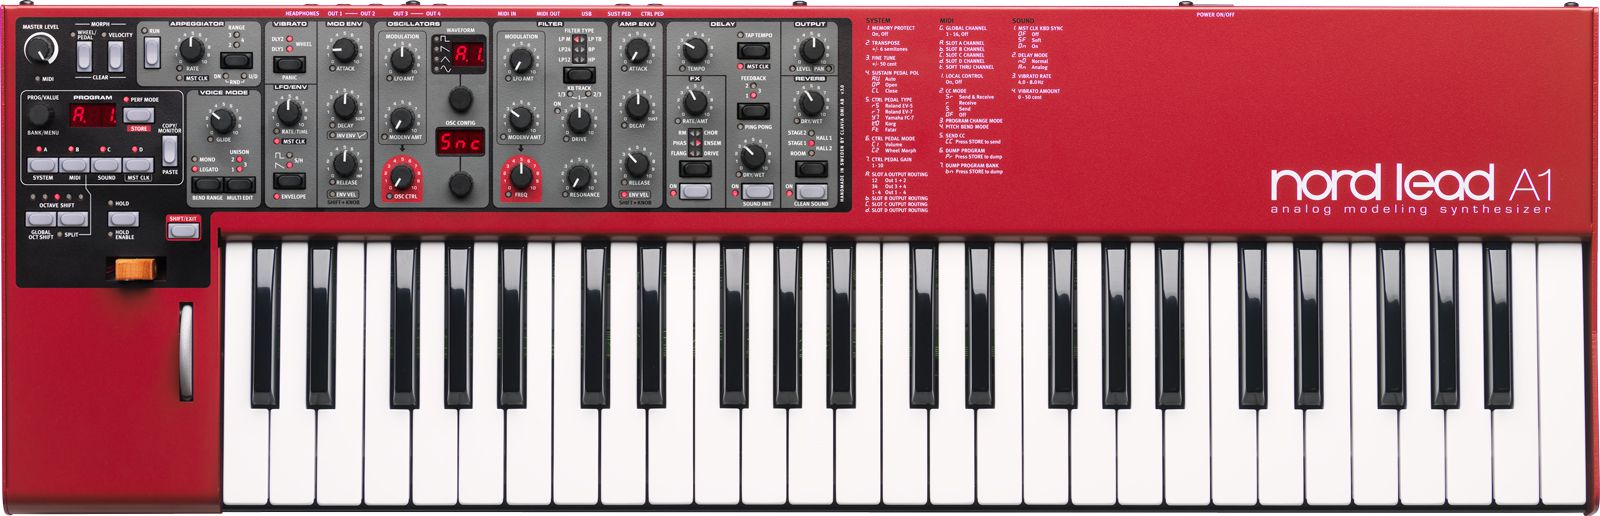 Nord Lead A1 analogue modelling synthesiser